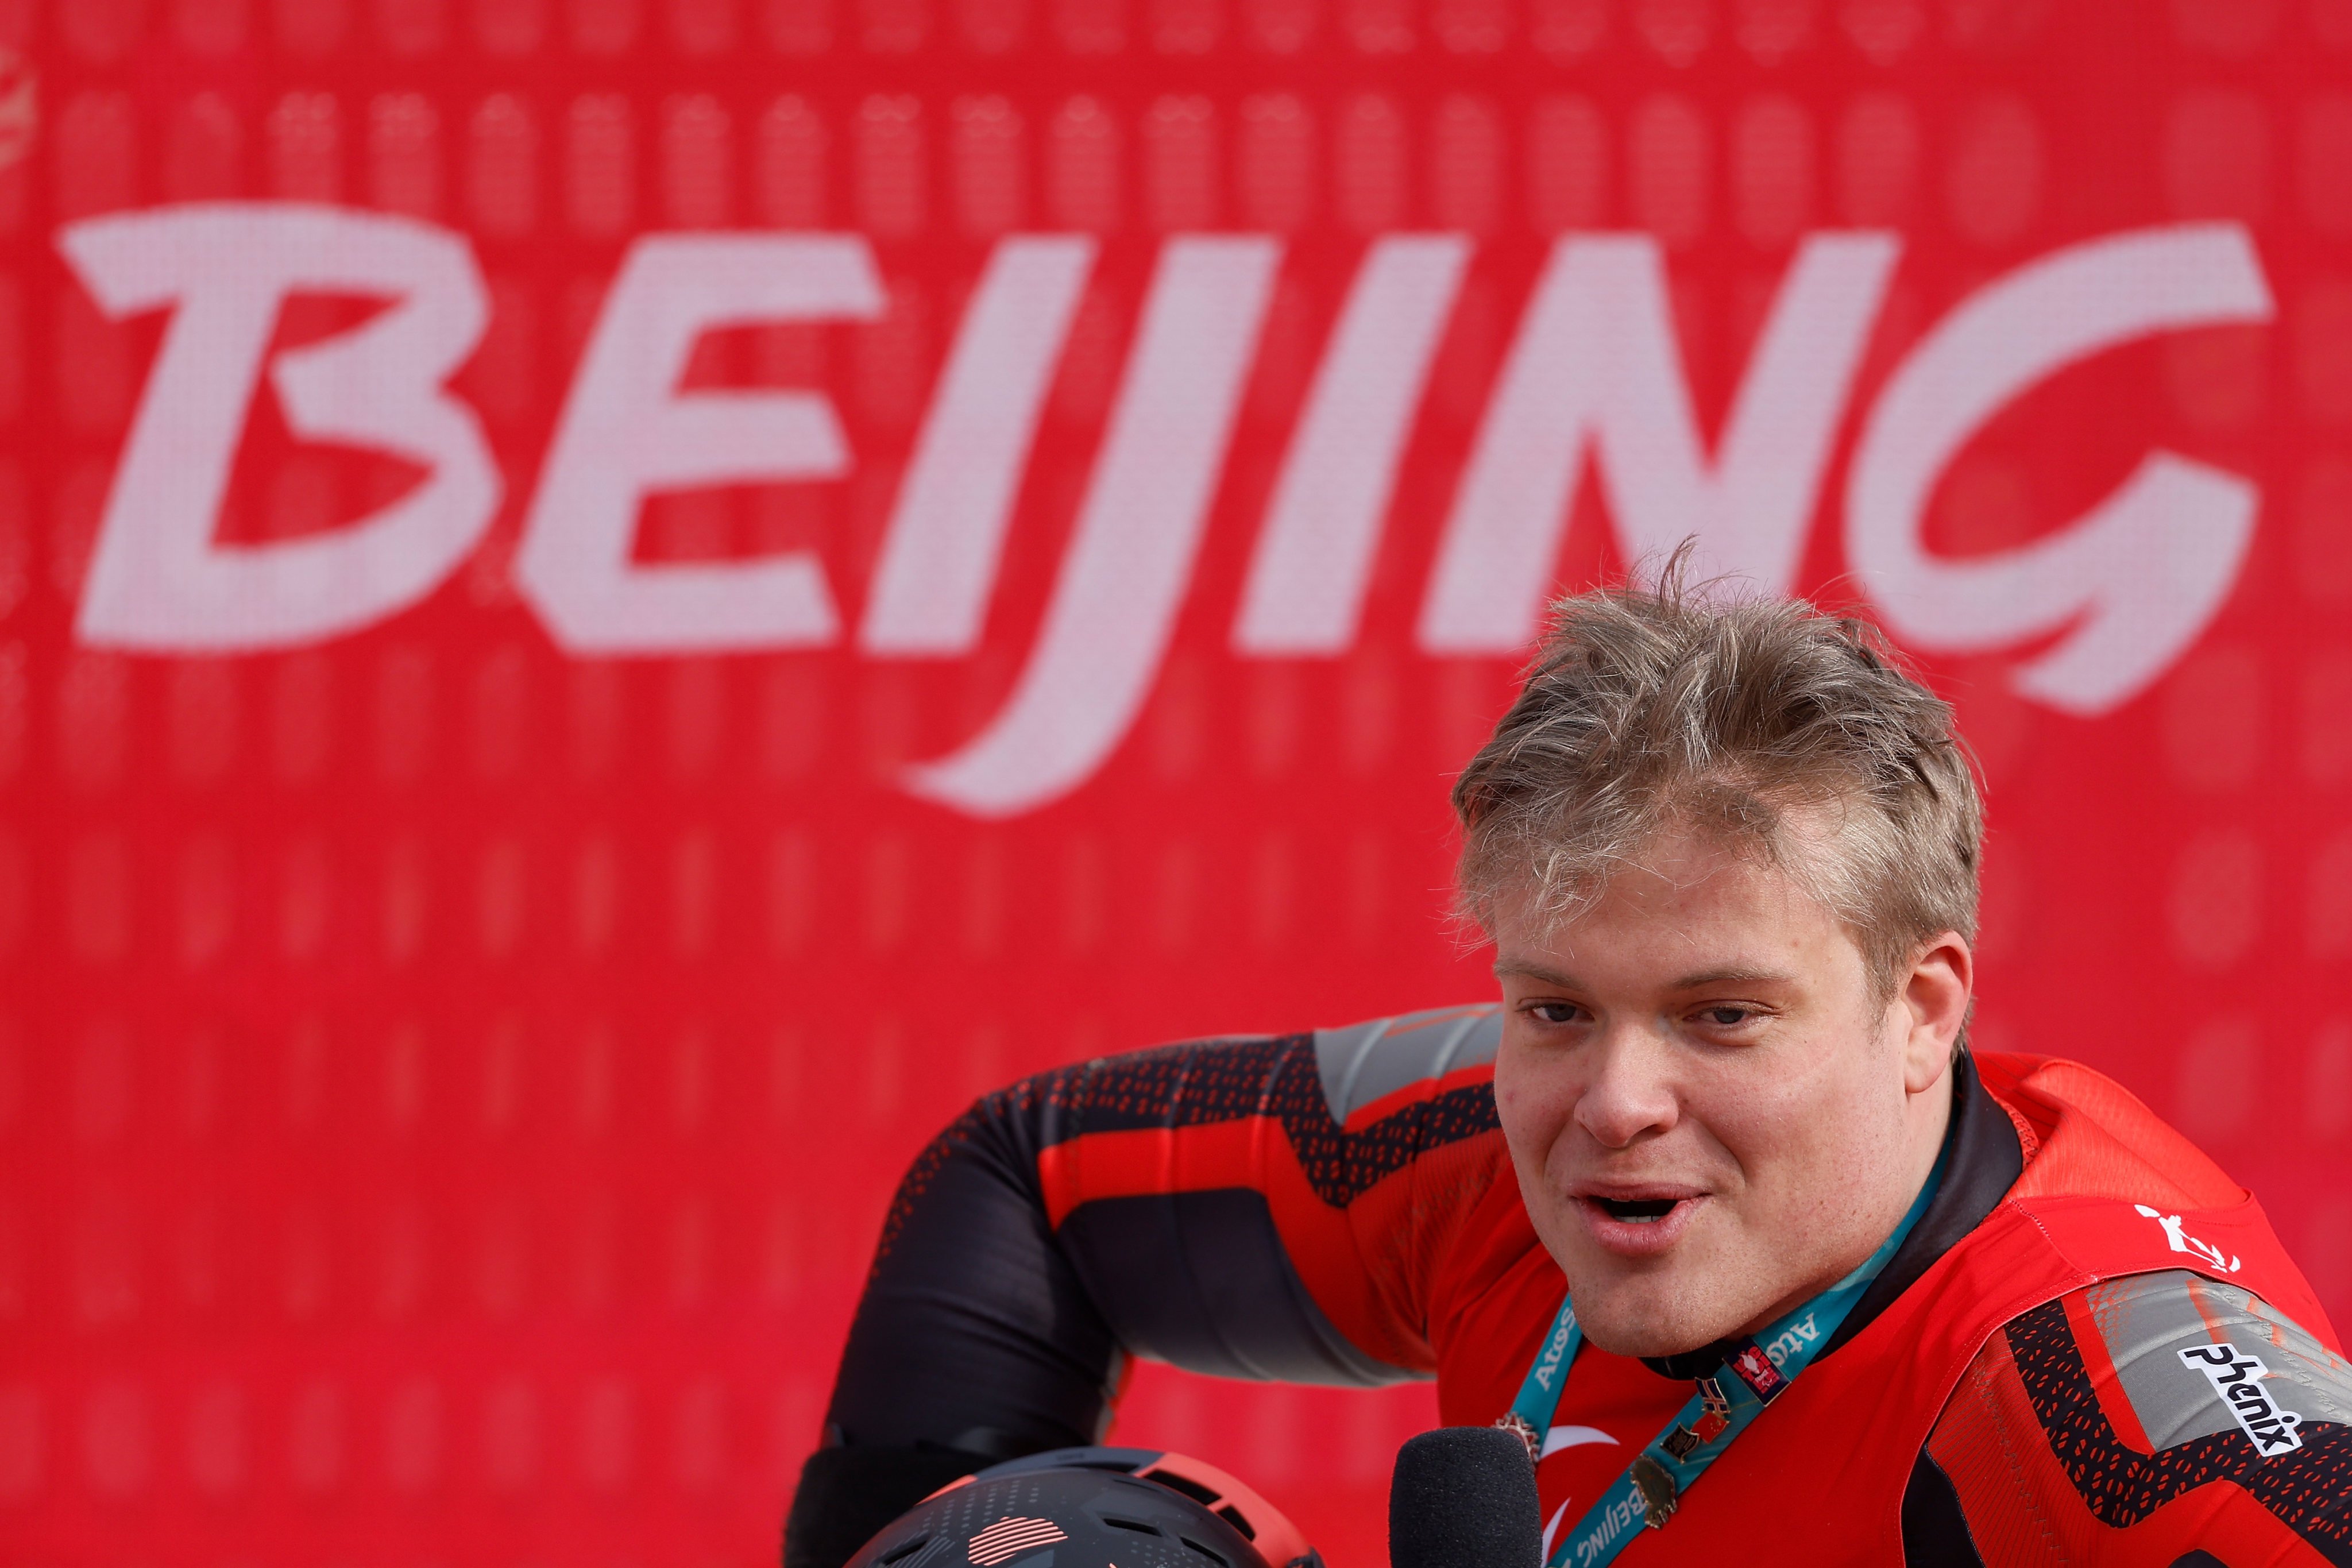 Jesper Pedersen speaks with the media after winning gold in the men’s slalom sitting at the Beijing 2022 Winter Paralympics. Photo: Getty Images